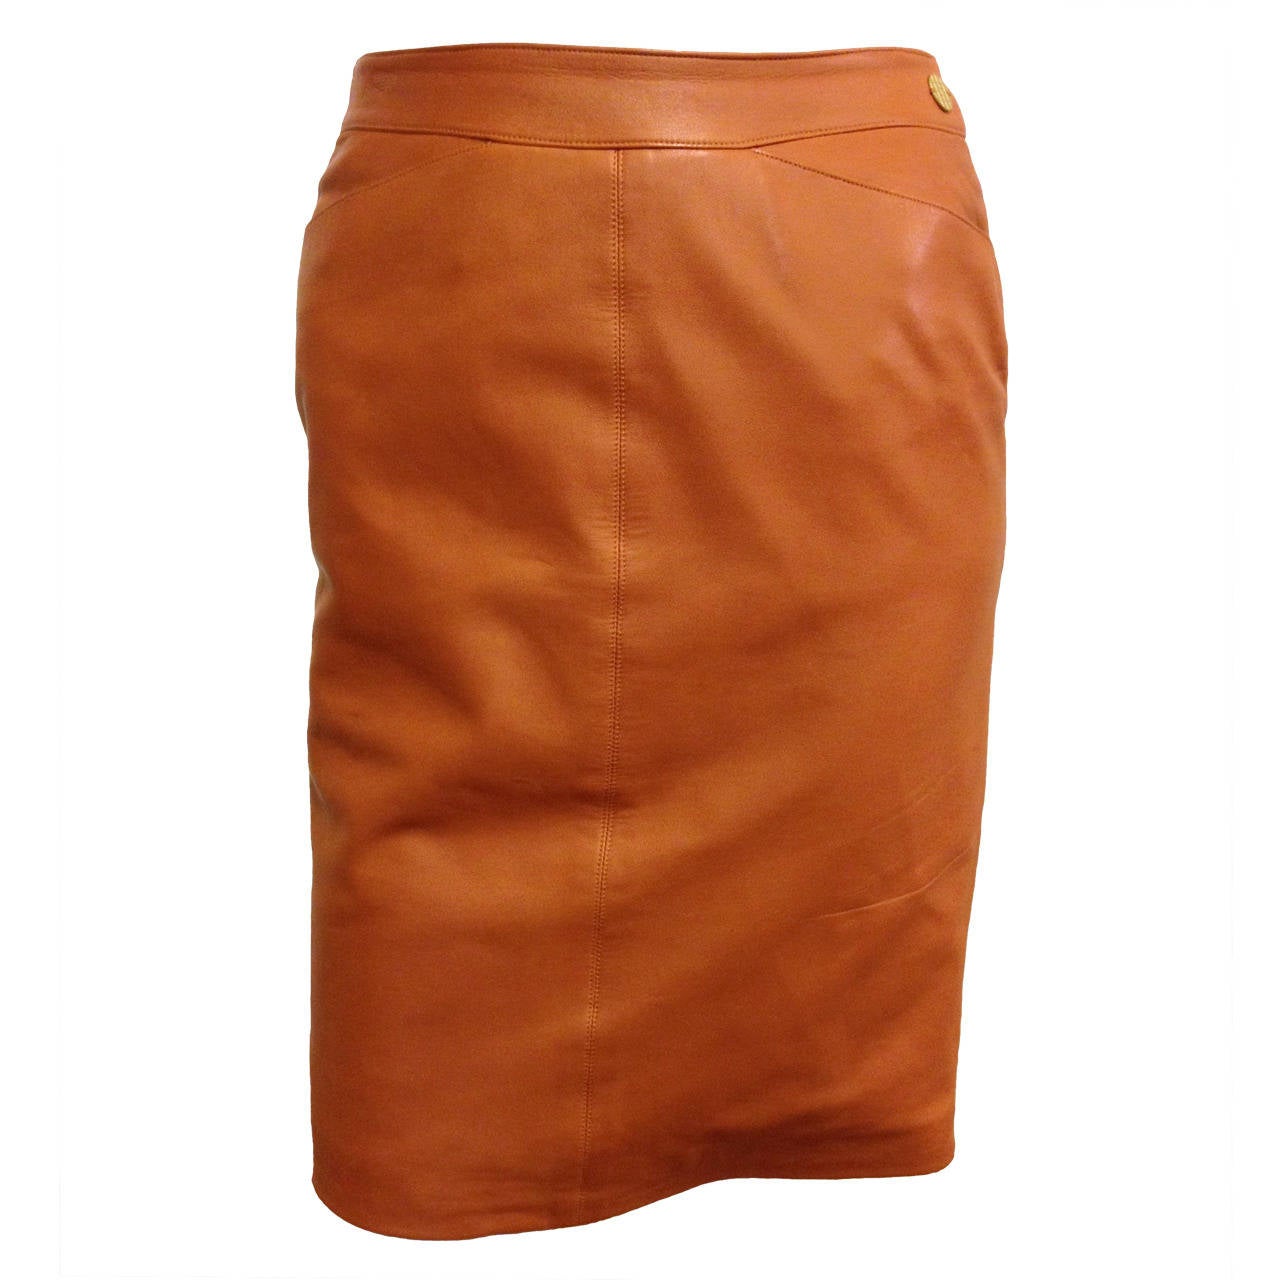 Chanel Caramel Rust Brown Leather Skirt